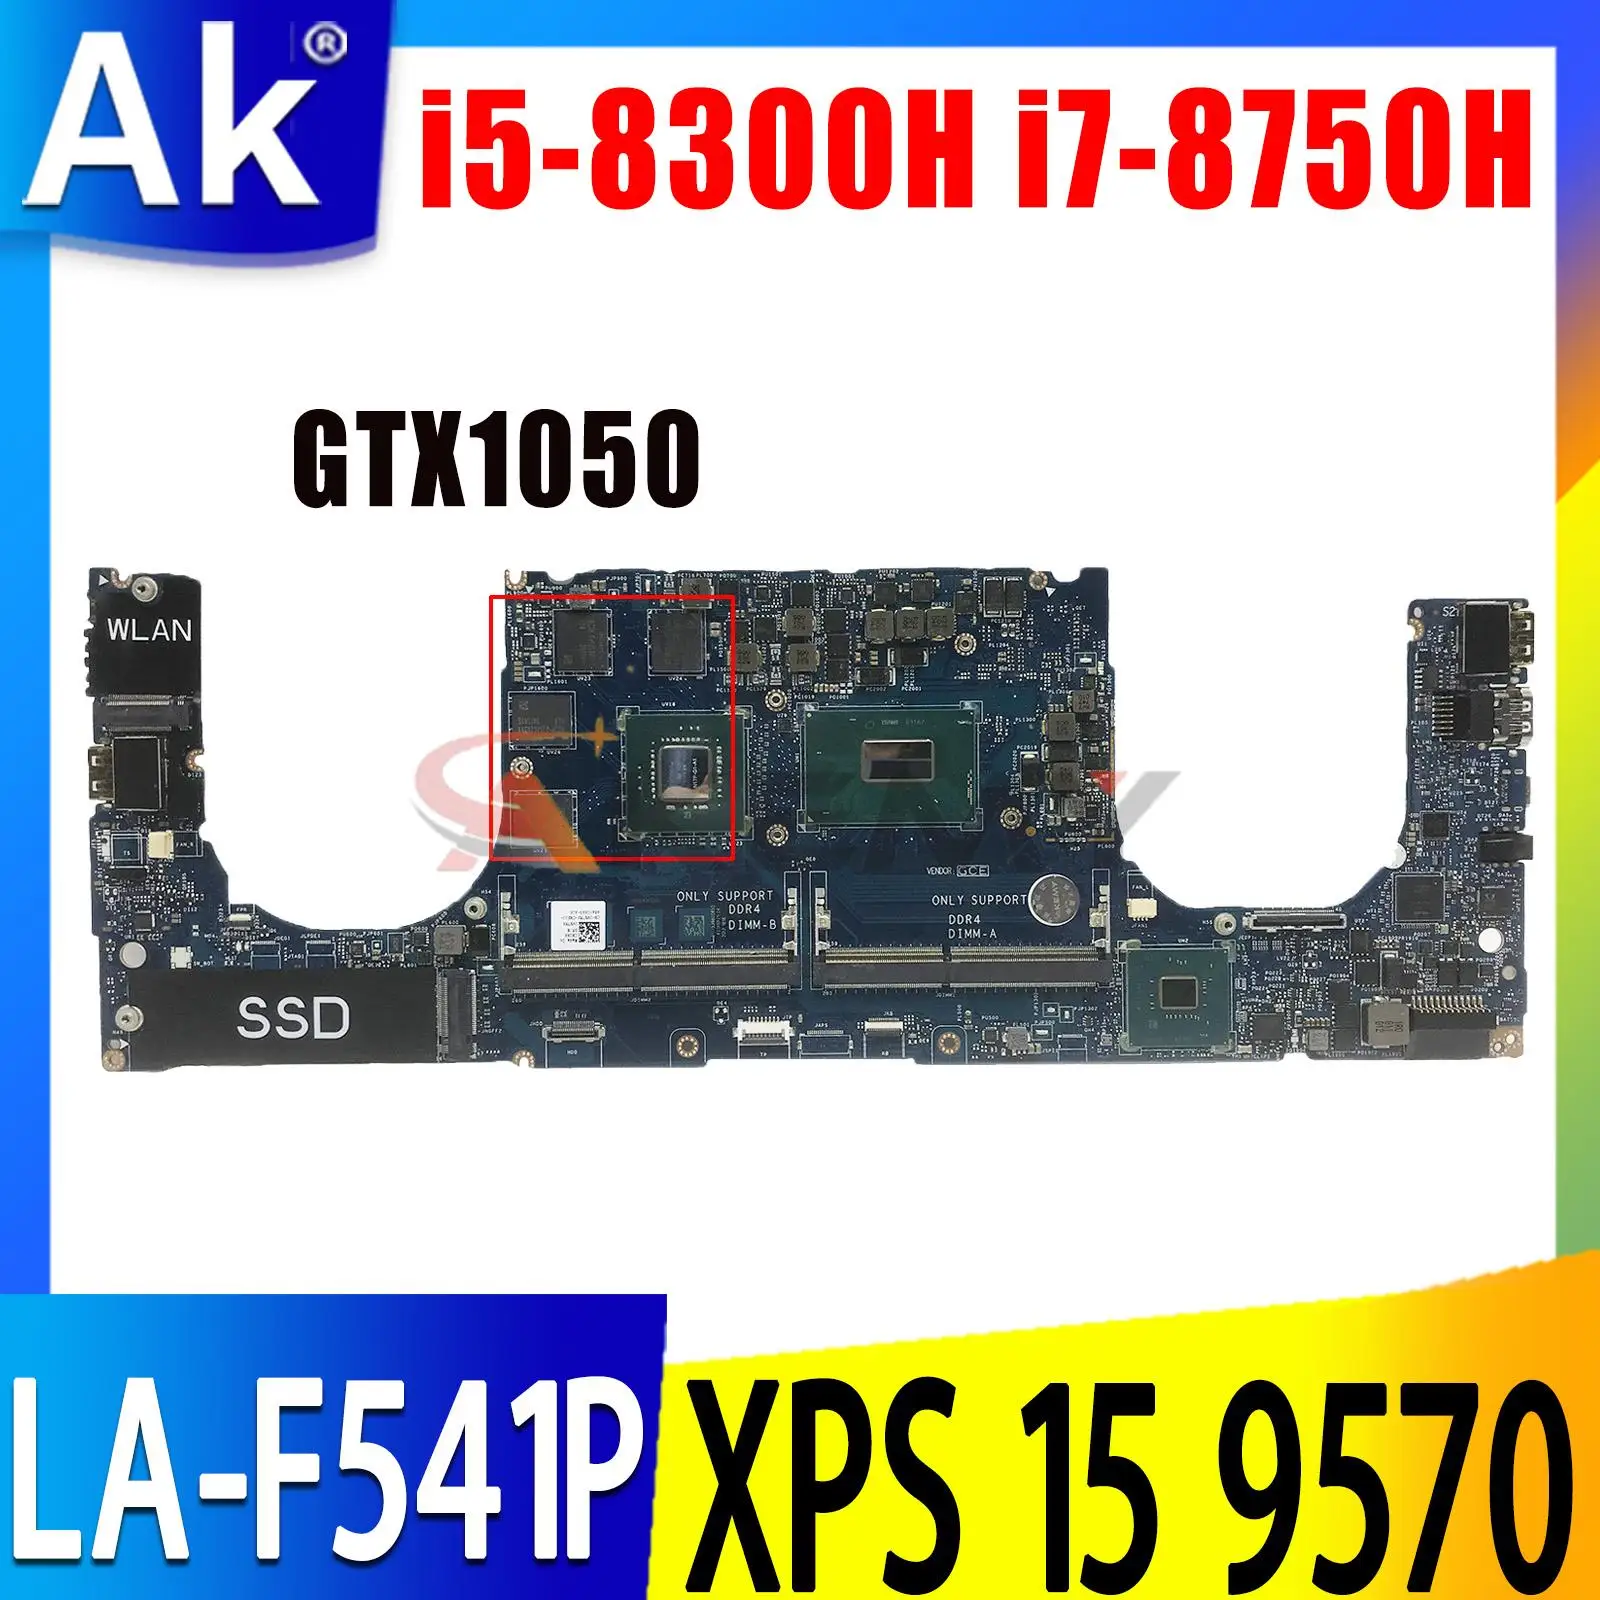 

FOR DELL XPS 15 9570 Laptop motherboard CN-0YYW9X CN-0YWFR1 LA-F541P with i5-8300H i7-8750H CPU Notebook mainboard GTX1050 GPU